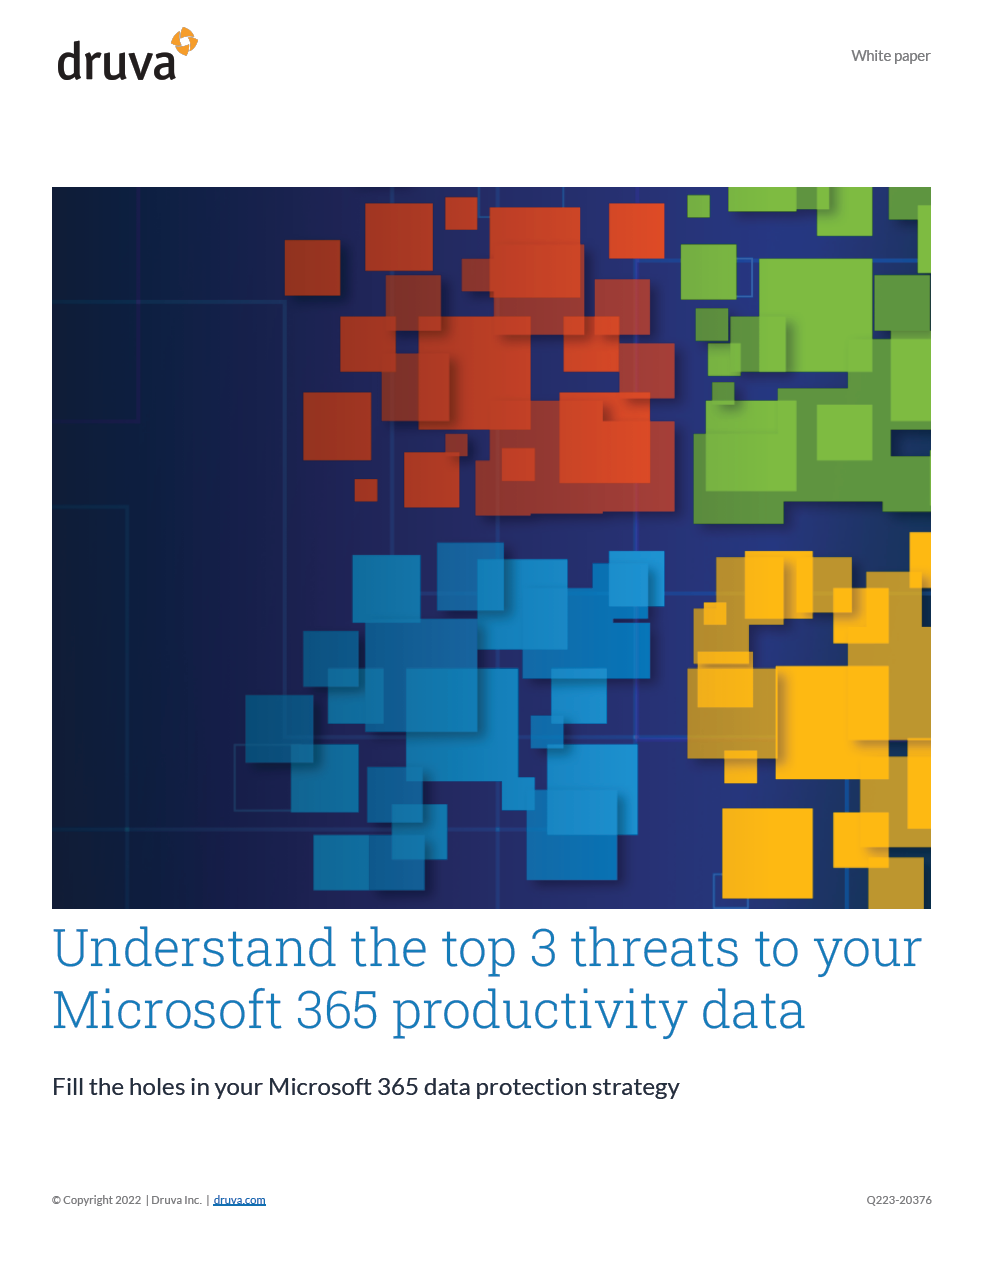 Understand the top 3 threats to your Microsoft 365 productivity data